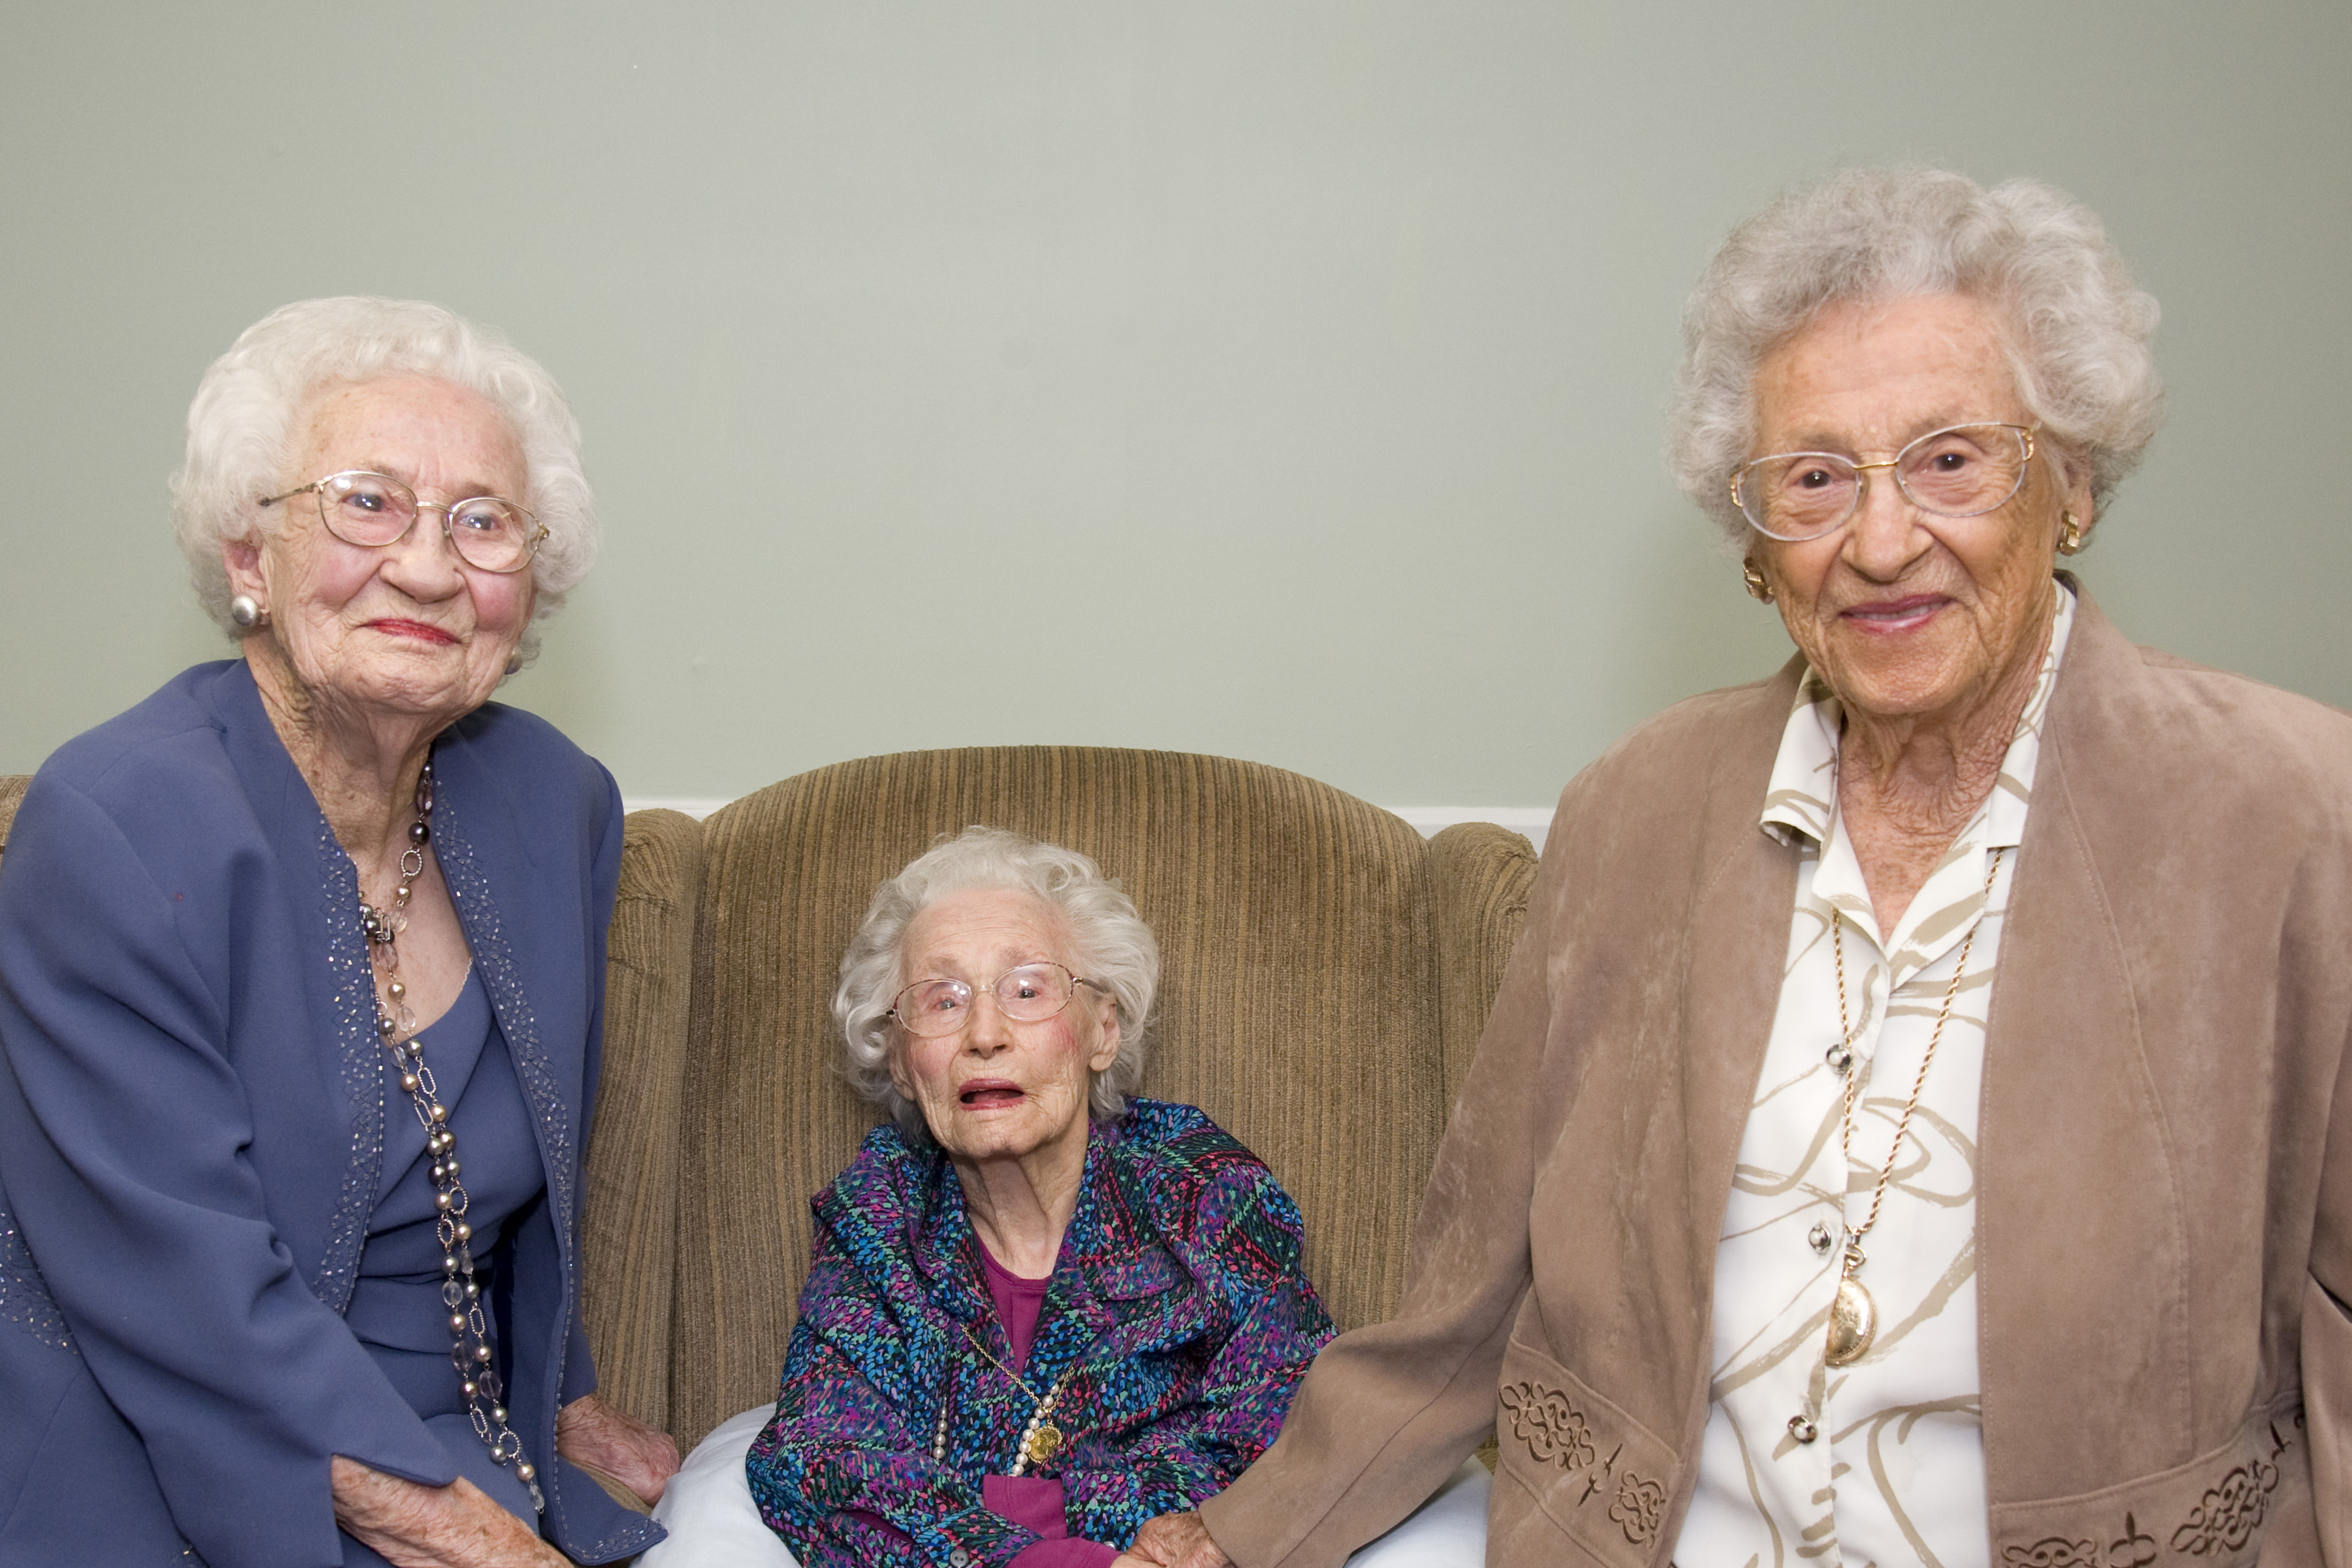 Brookdale and Wish of a Lifetime(TM) grant a Wish to Rose Shloss to see her sisters again after 10 years. From left to right: Ruth Branum, 104, of Tulsa, Okla., Rubye Cox, 110, of Bristol, R.I. and Rose Shloss, 101, of Sarasota, Fla. reunite in Rhode Island. (PRNewsFoto/Brookdale Senior Living Inc. )